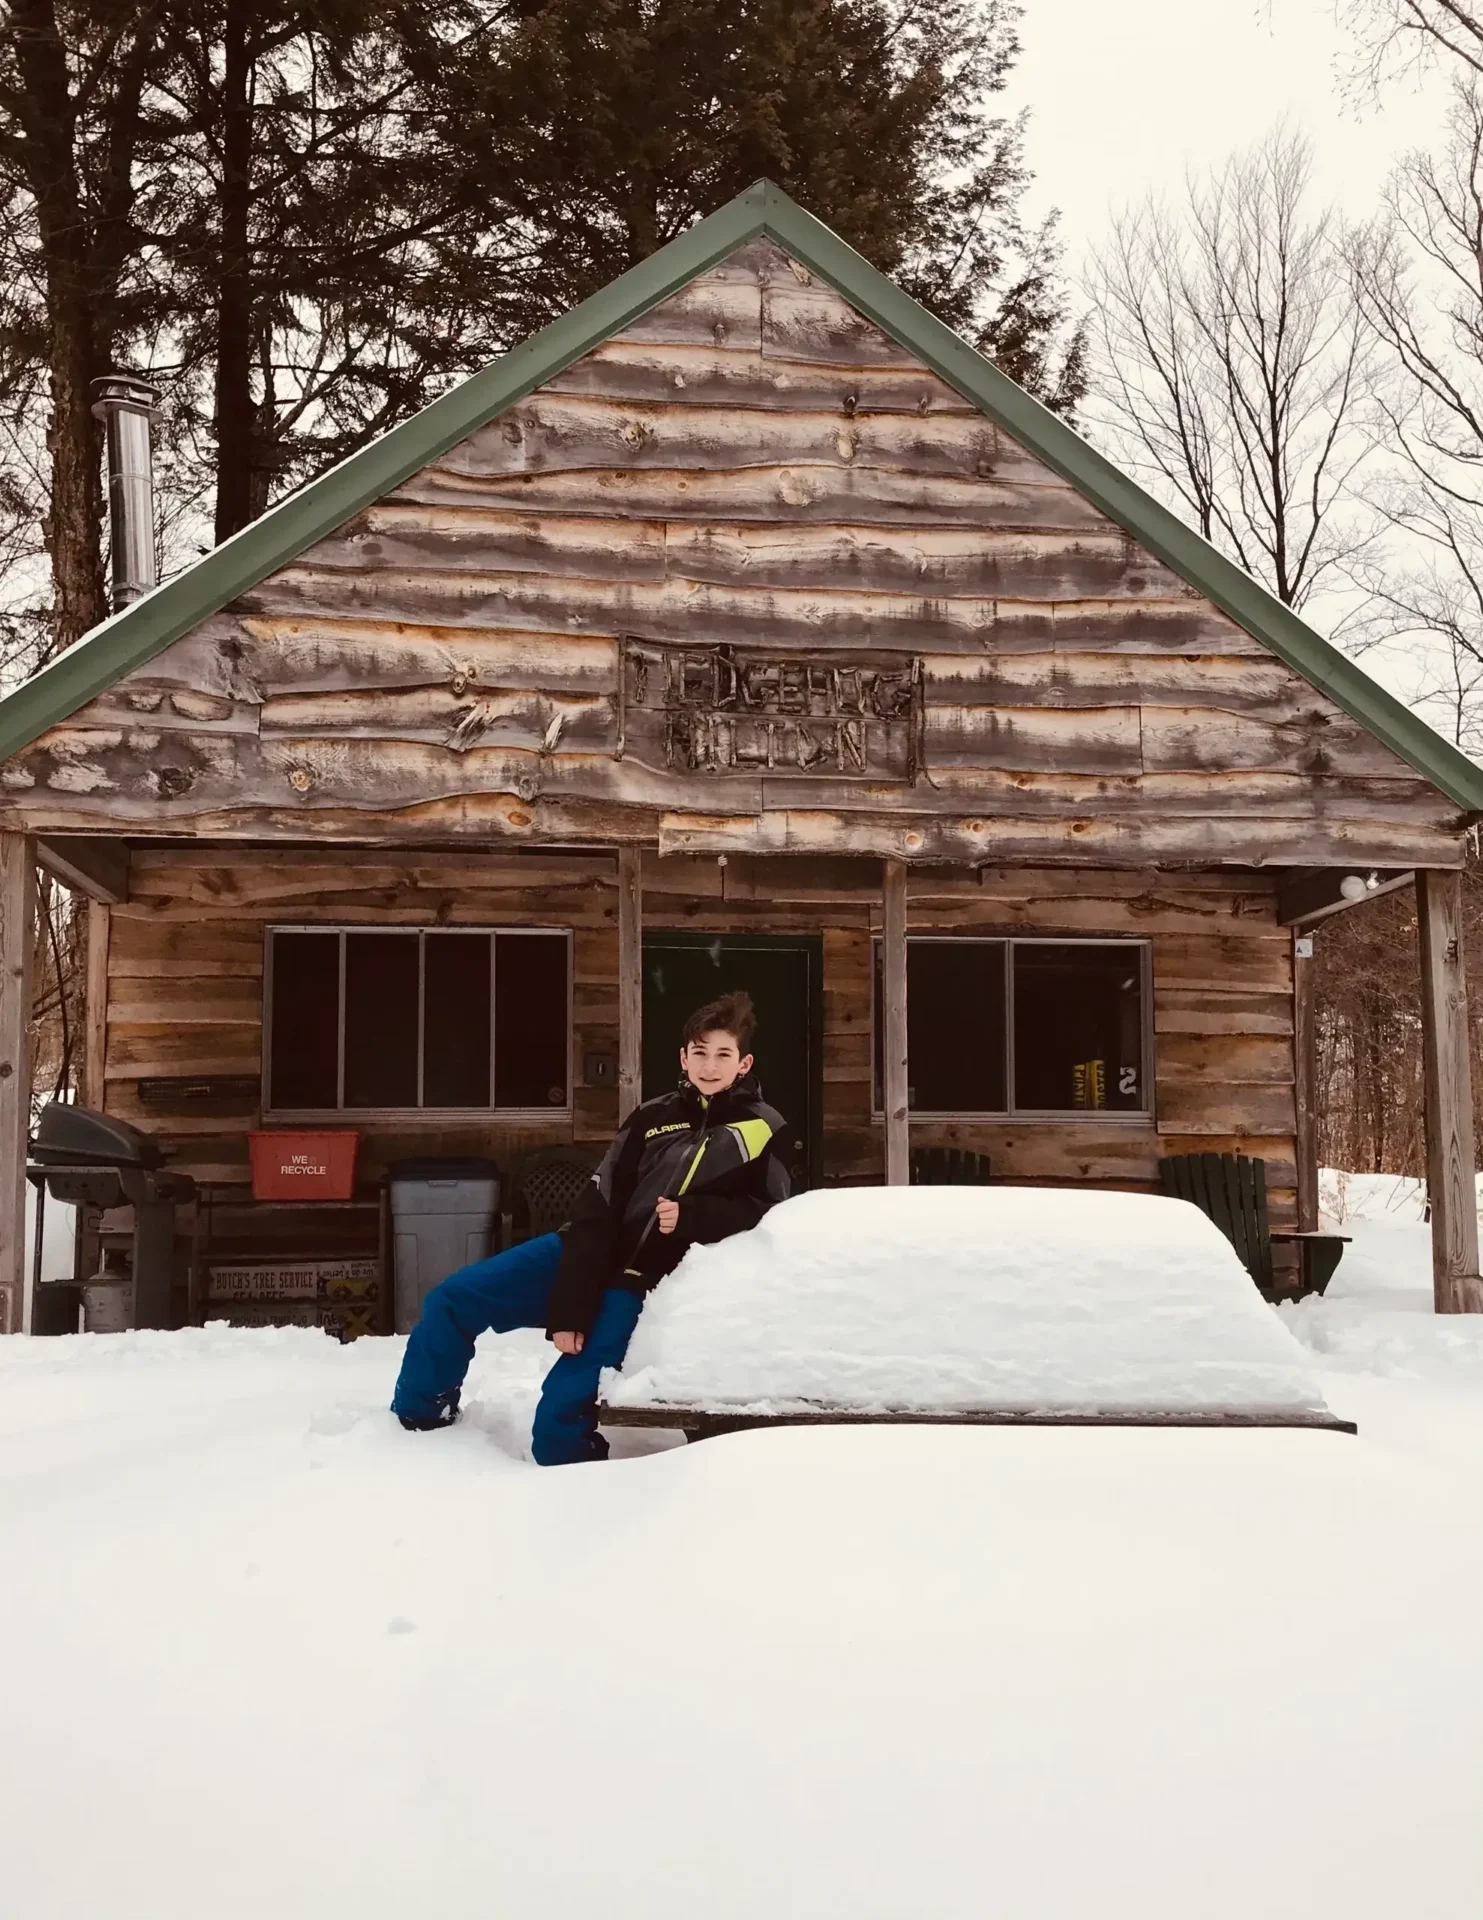 A man sitting in the snow outside of a log cabin.